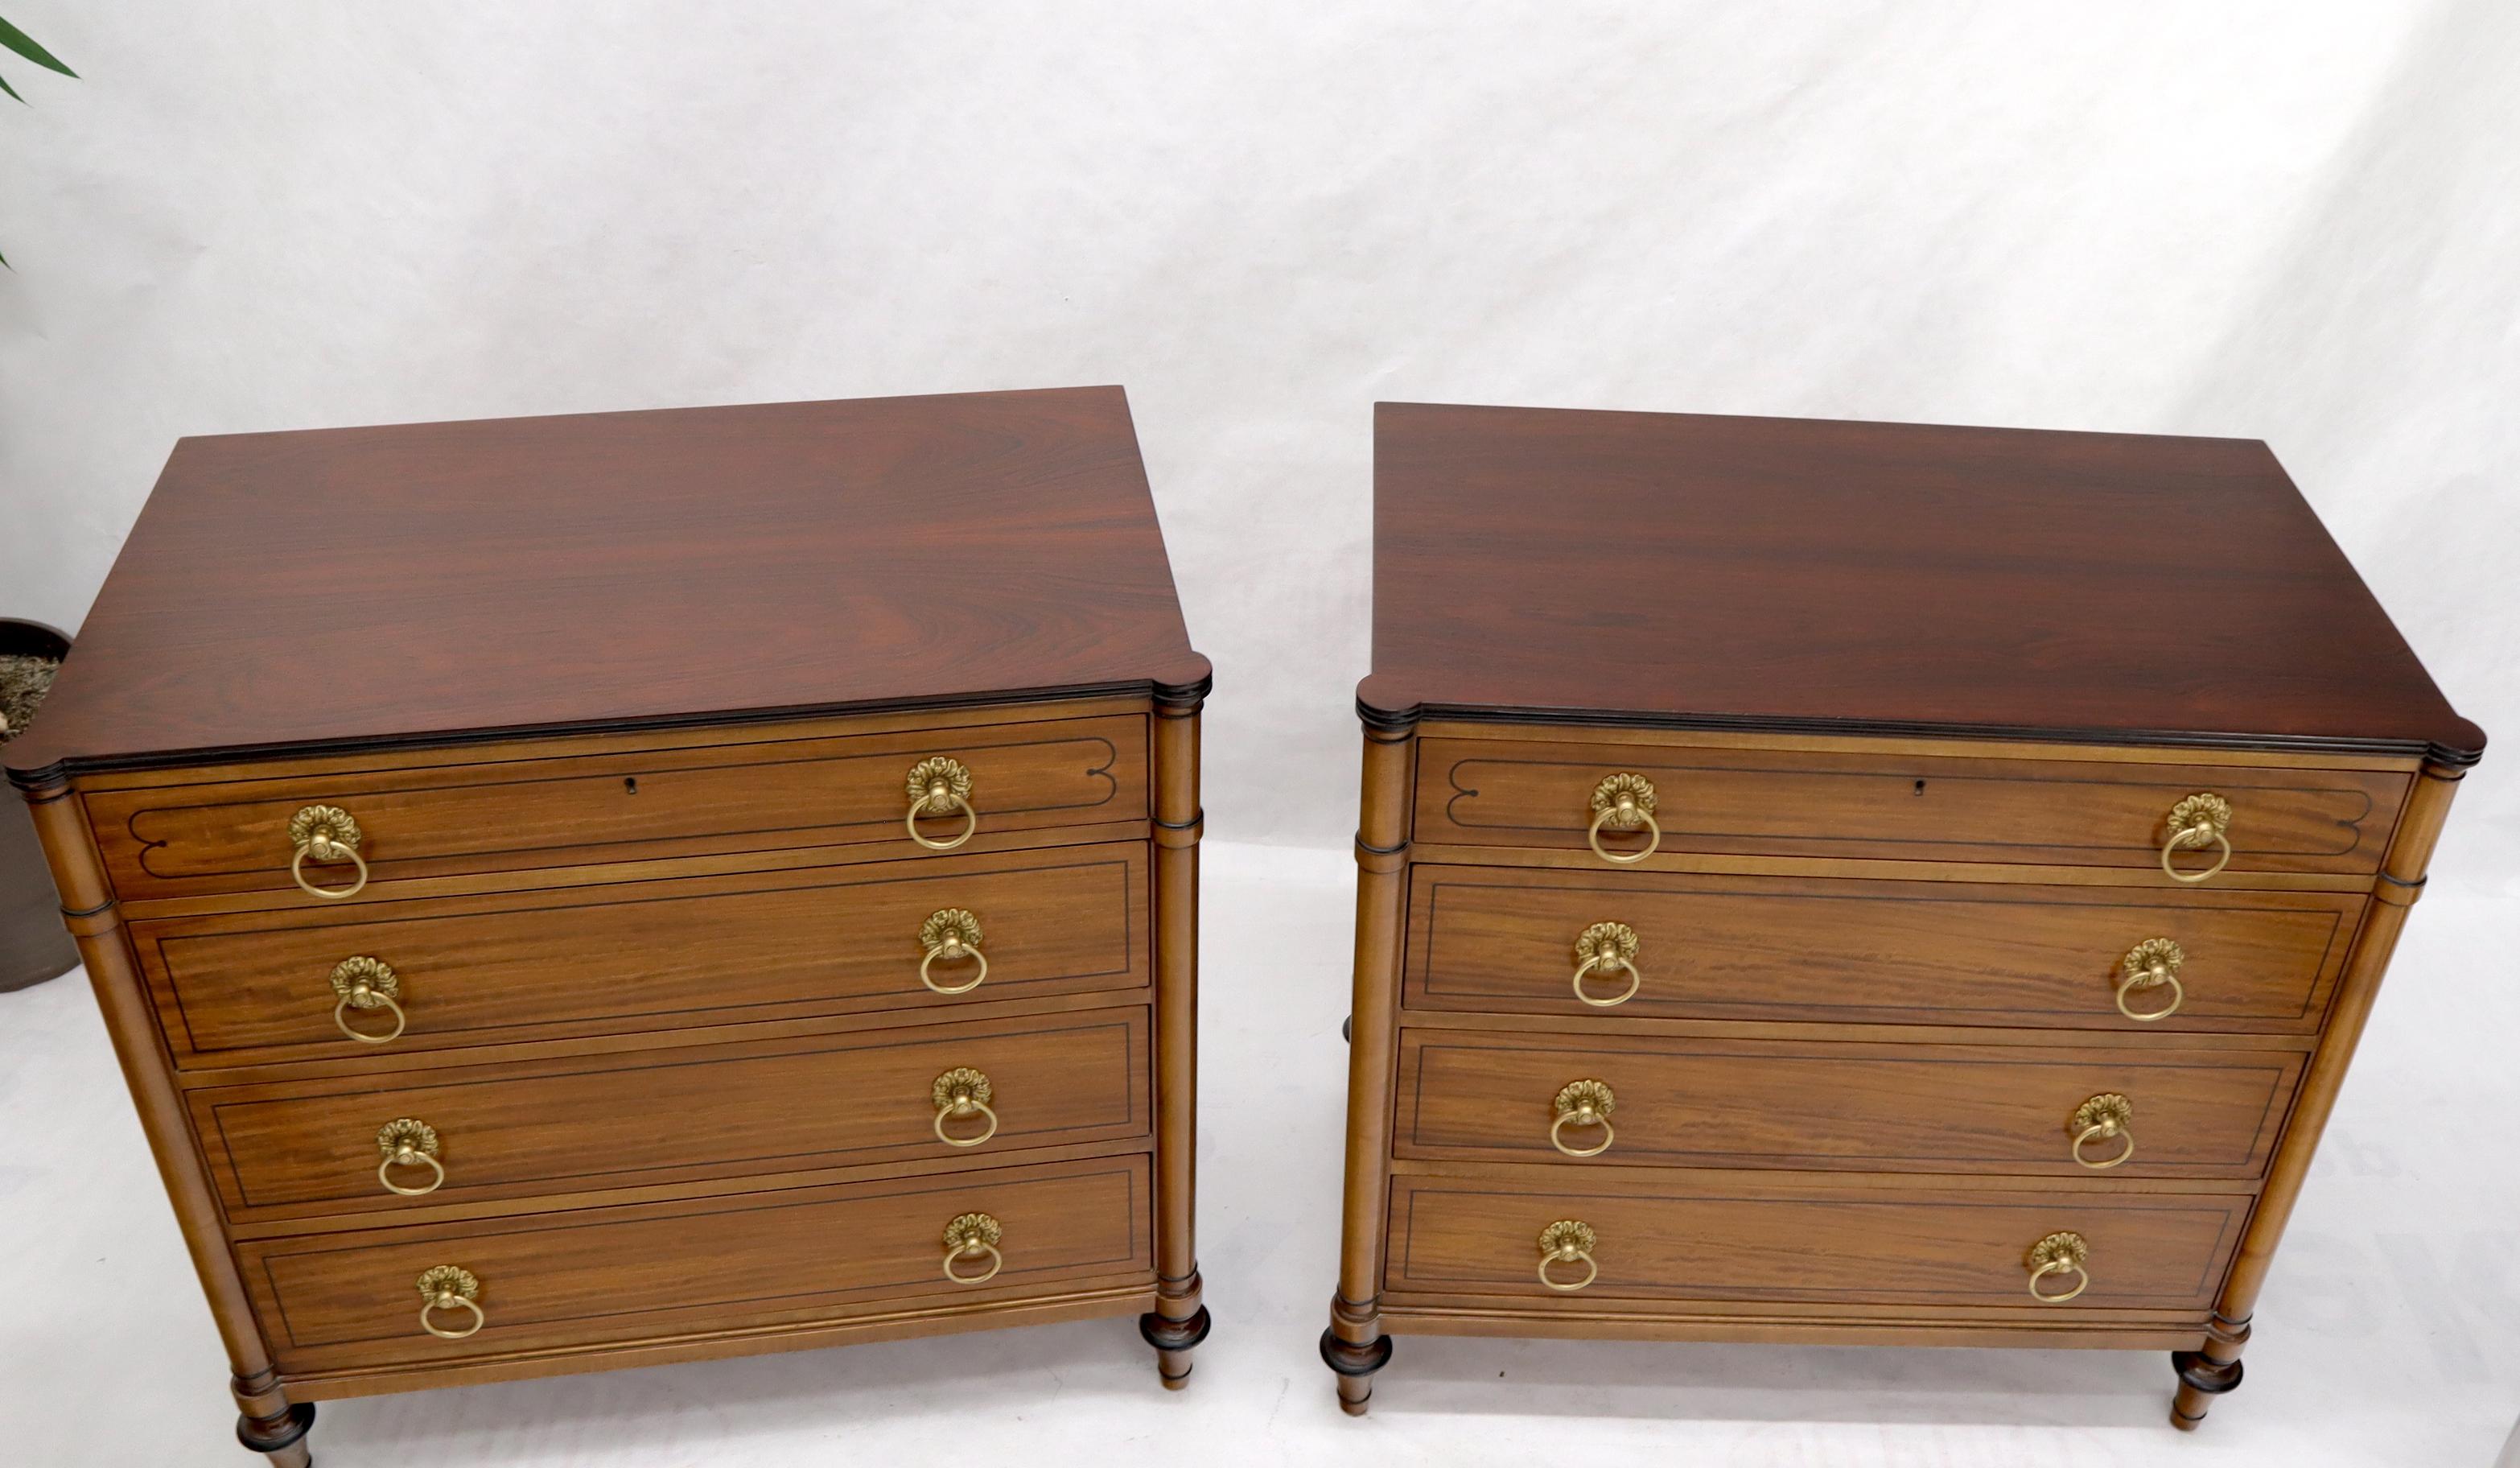 Pair of Rosewood Tops Satin Wood Heavy Brass Ring Pulls 4-Drawer Bachelor Chests In Good Condition For Sale In Rockaway, NJ